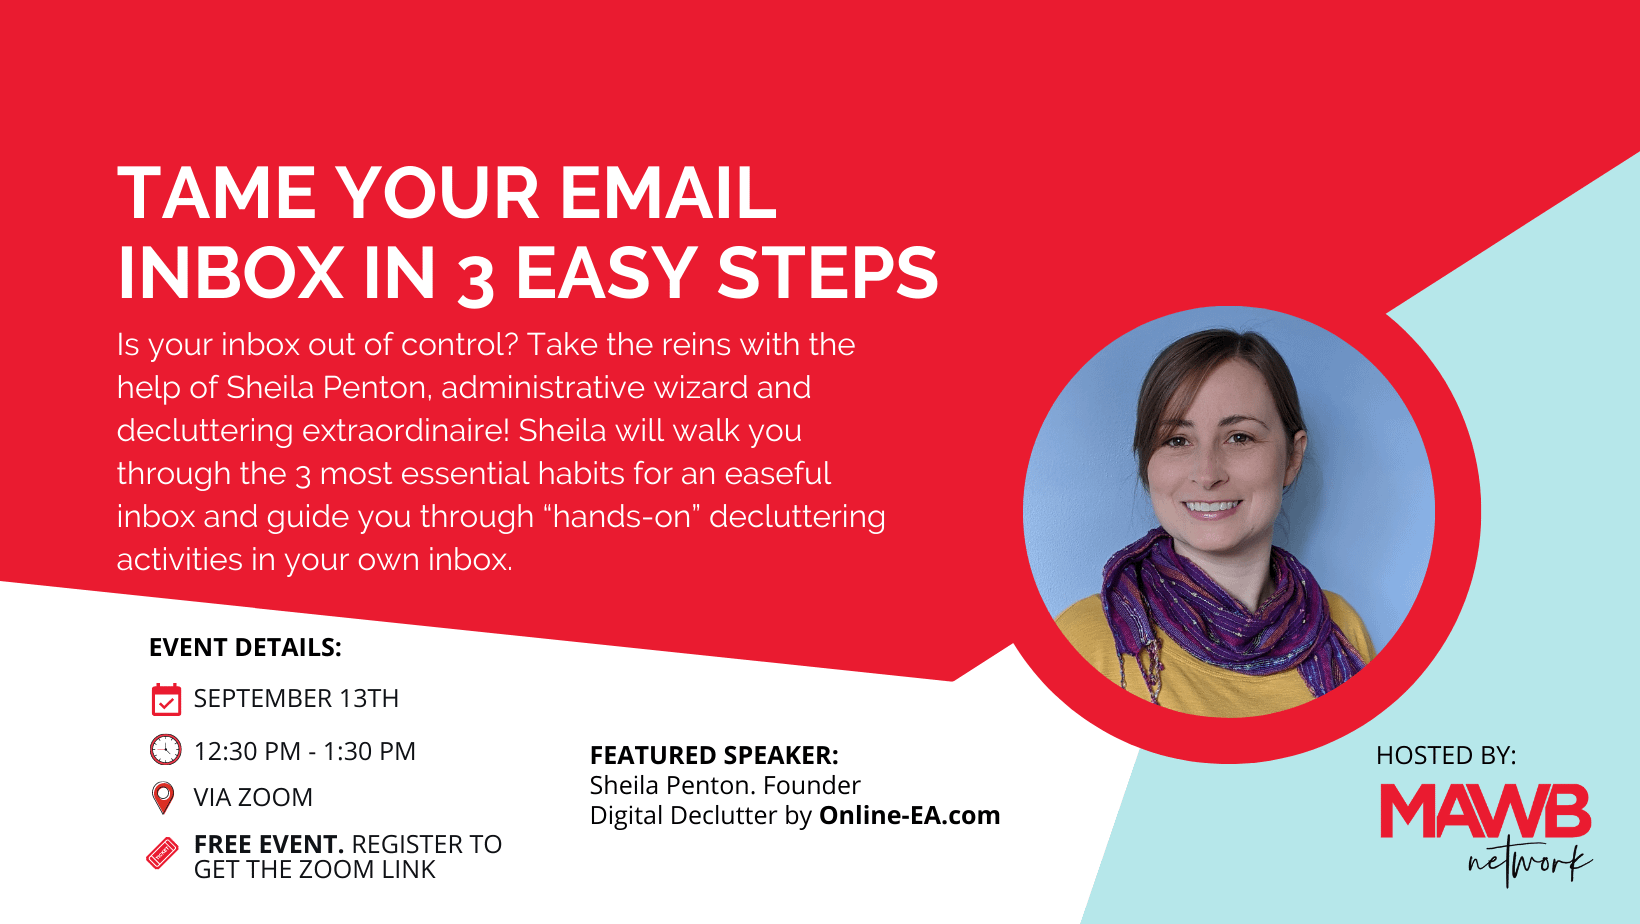 Tame Your Email Inbox in 3 Easy Steps